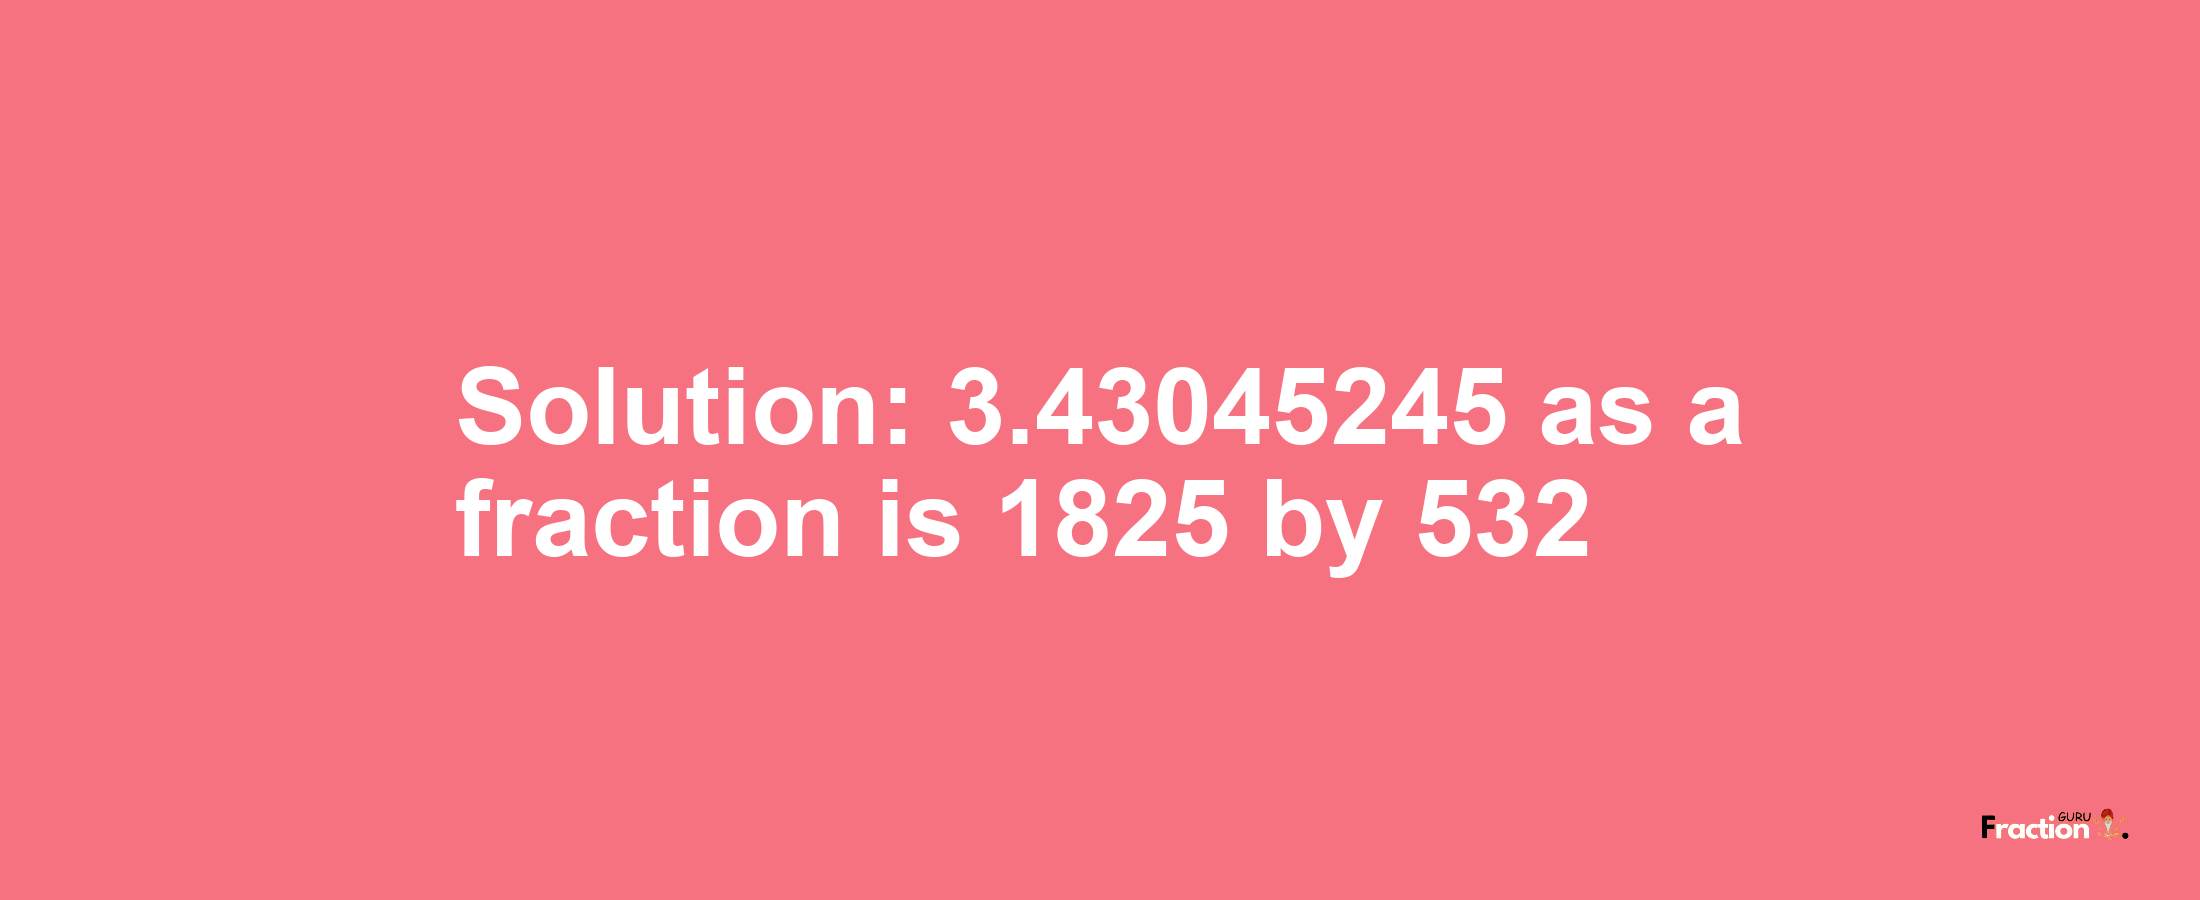 Solution:3.43045245 as a fraction is 1825/532